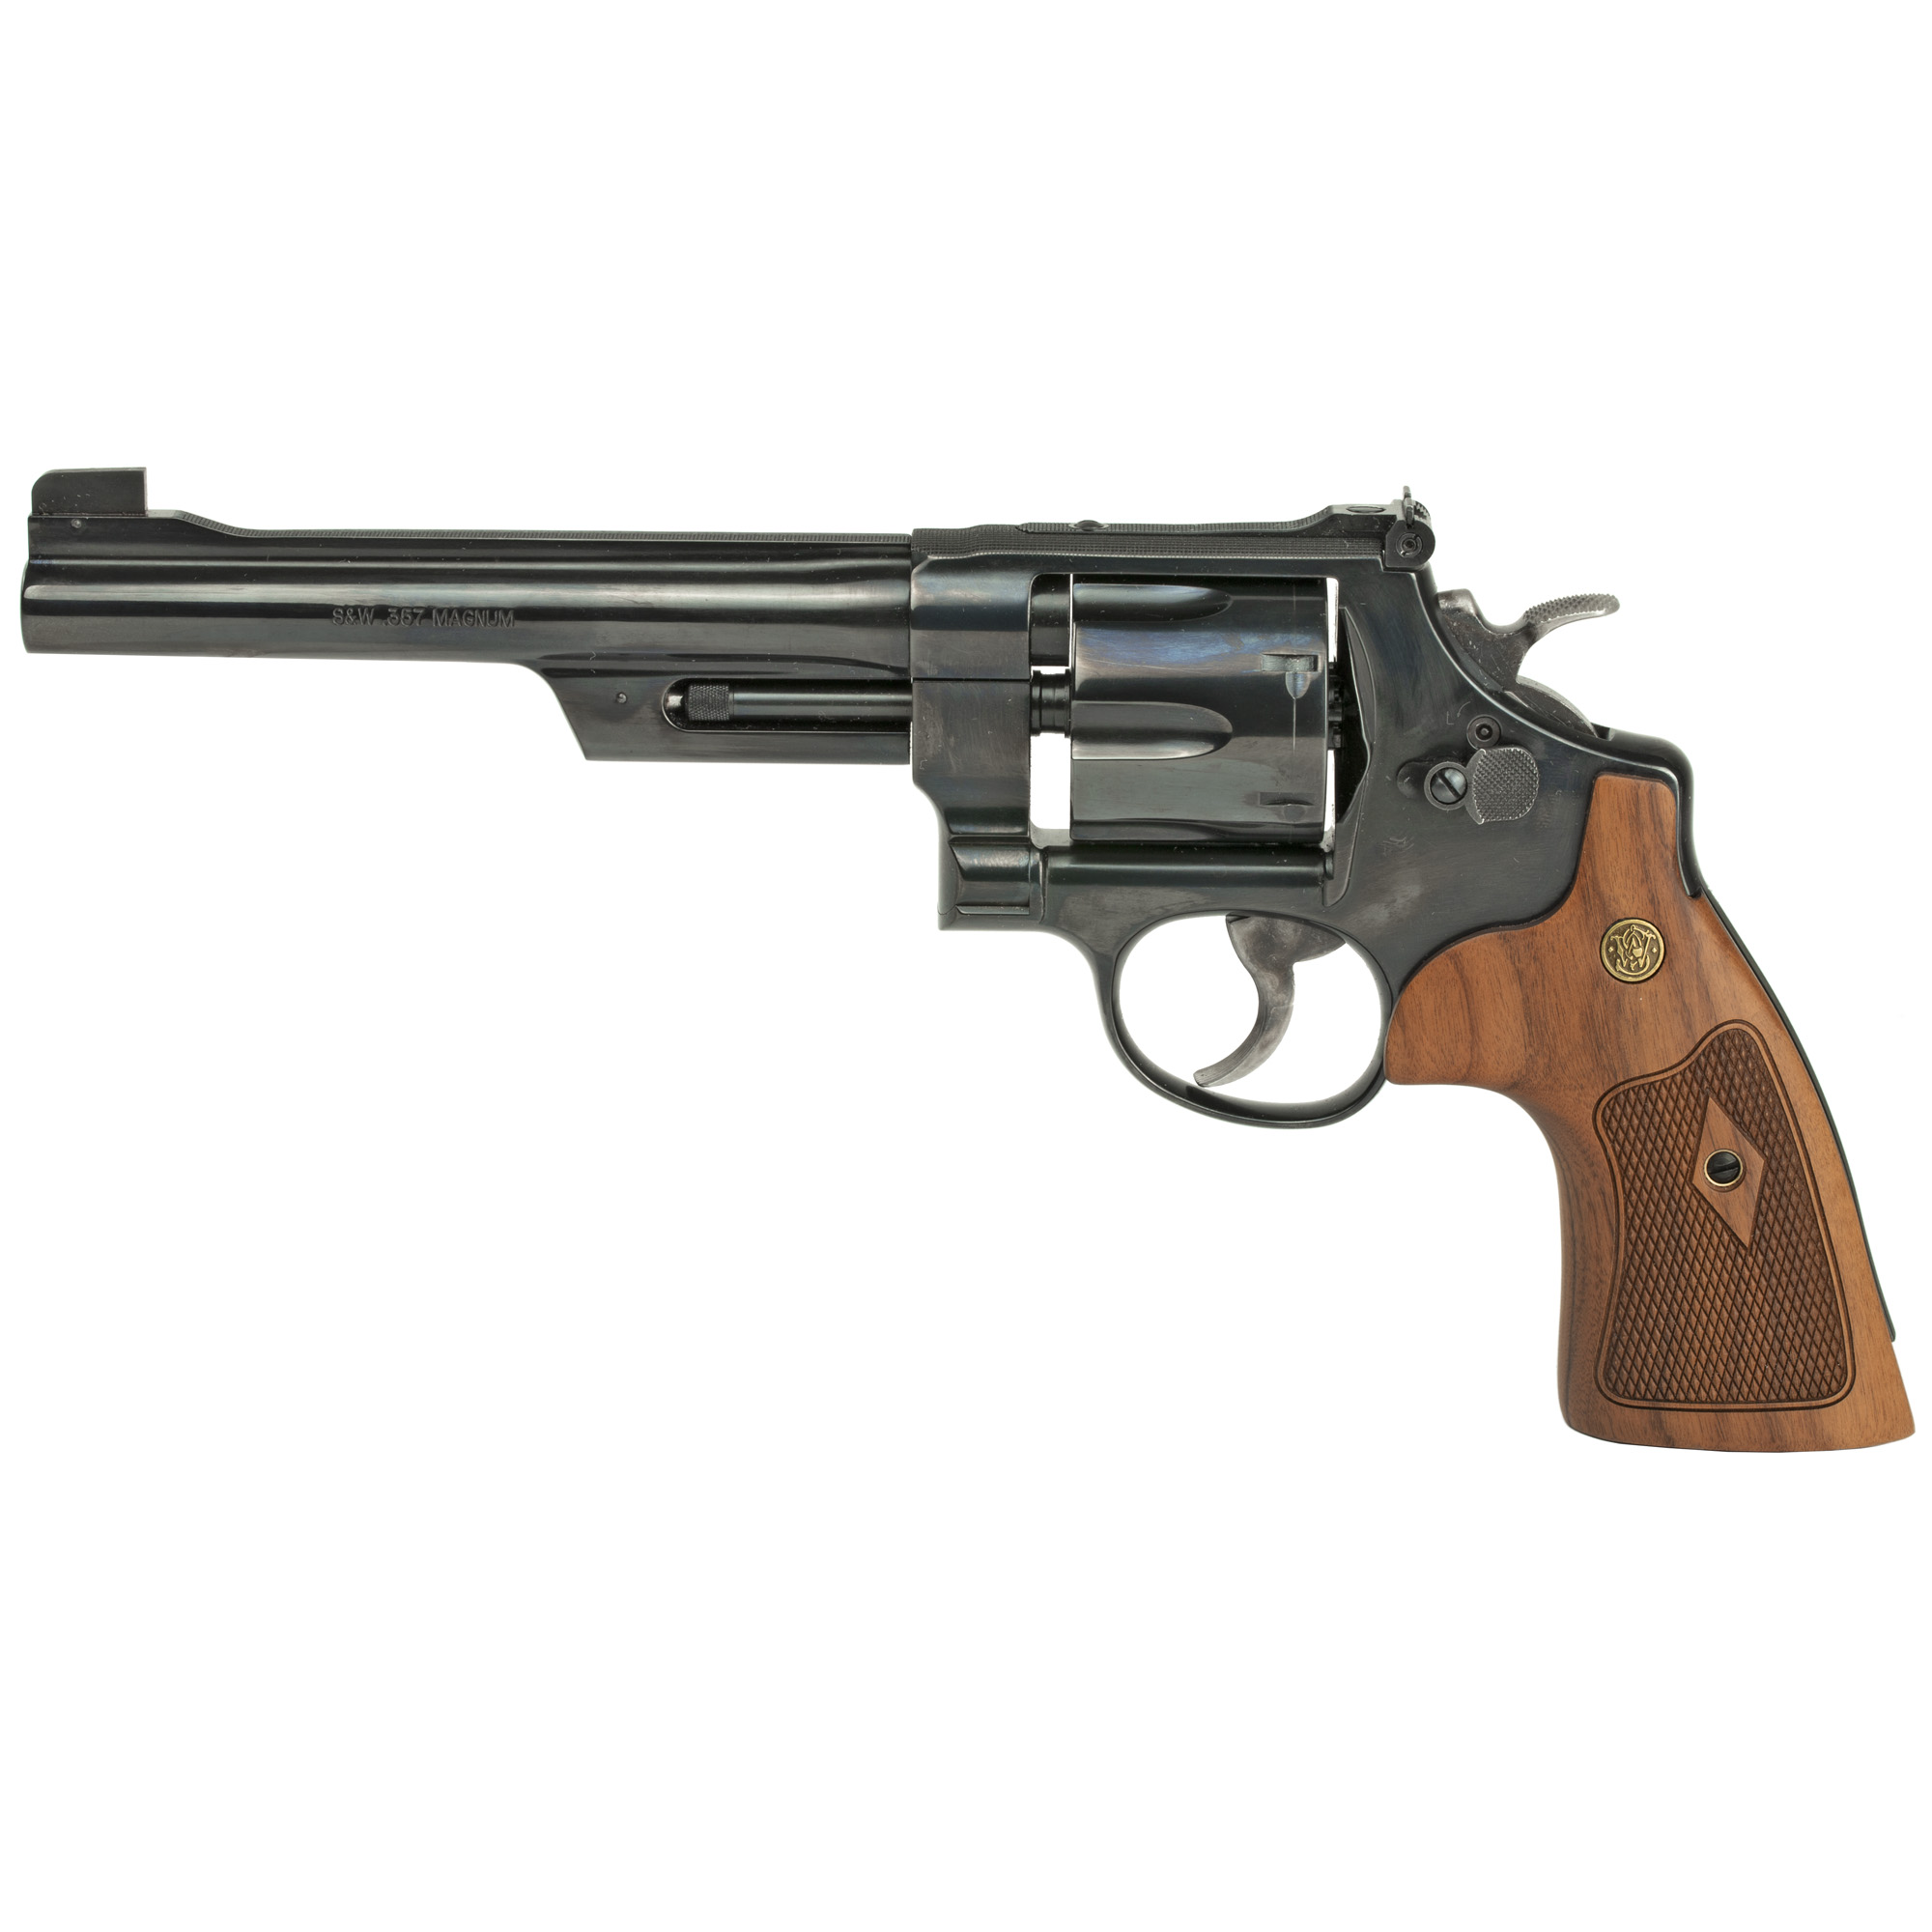 S&W 27 CLASSIC 357MAG 6.5 BL 6RD